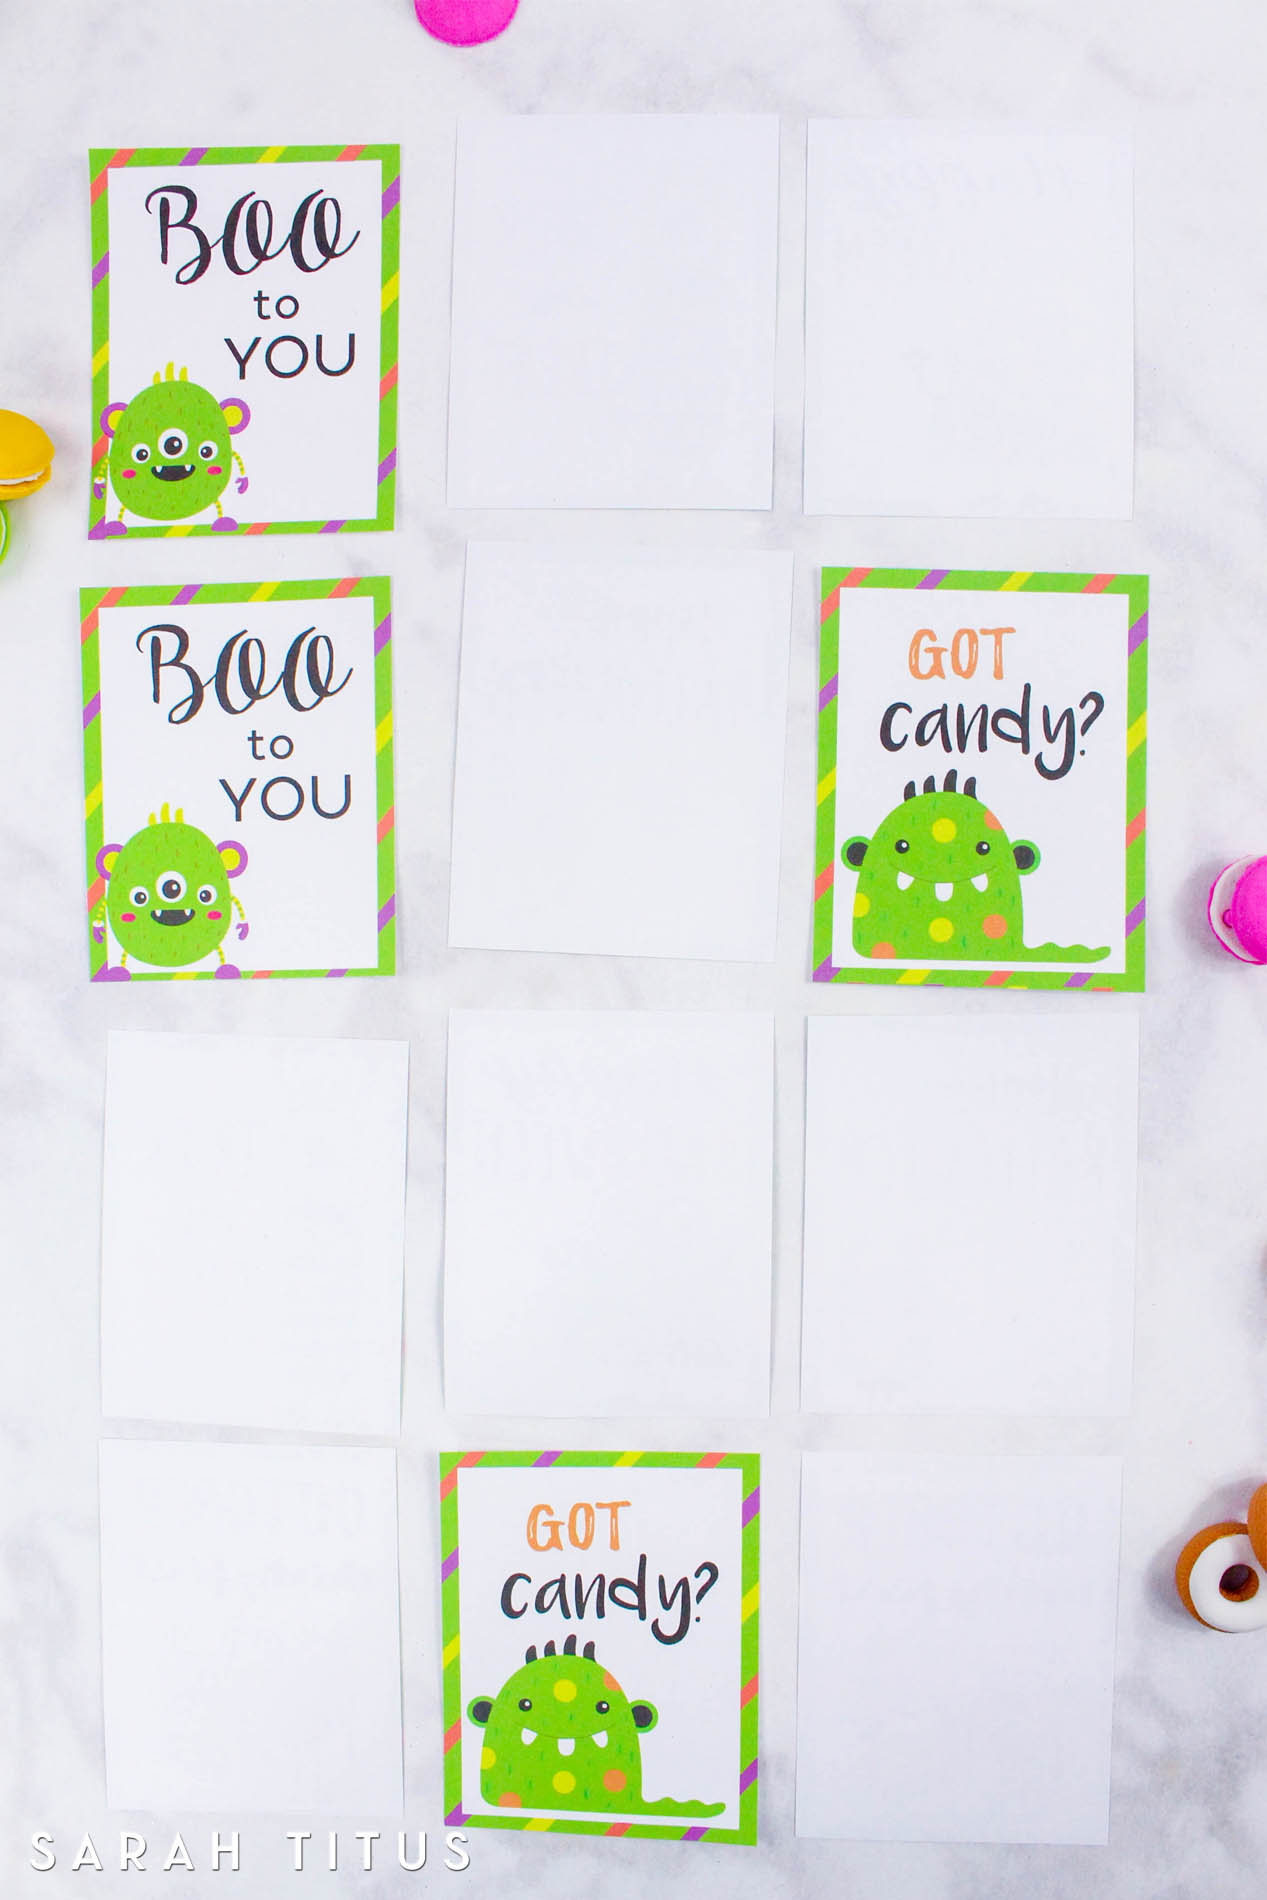 No need to go to the store and pay $10 for a game for your kids to play. Simply print these Halloween memory cards out FOR FREE! 